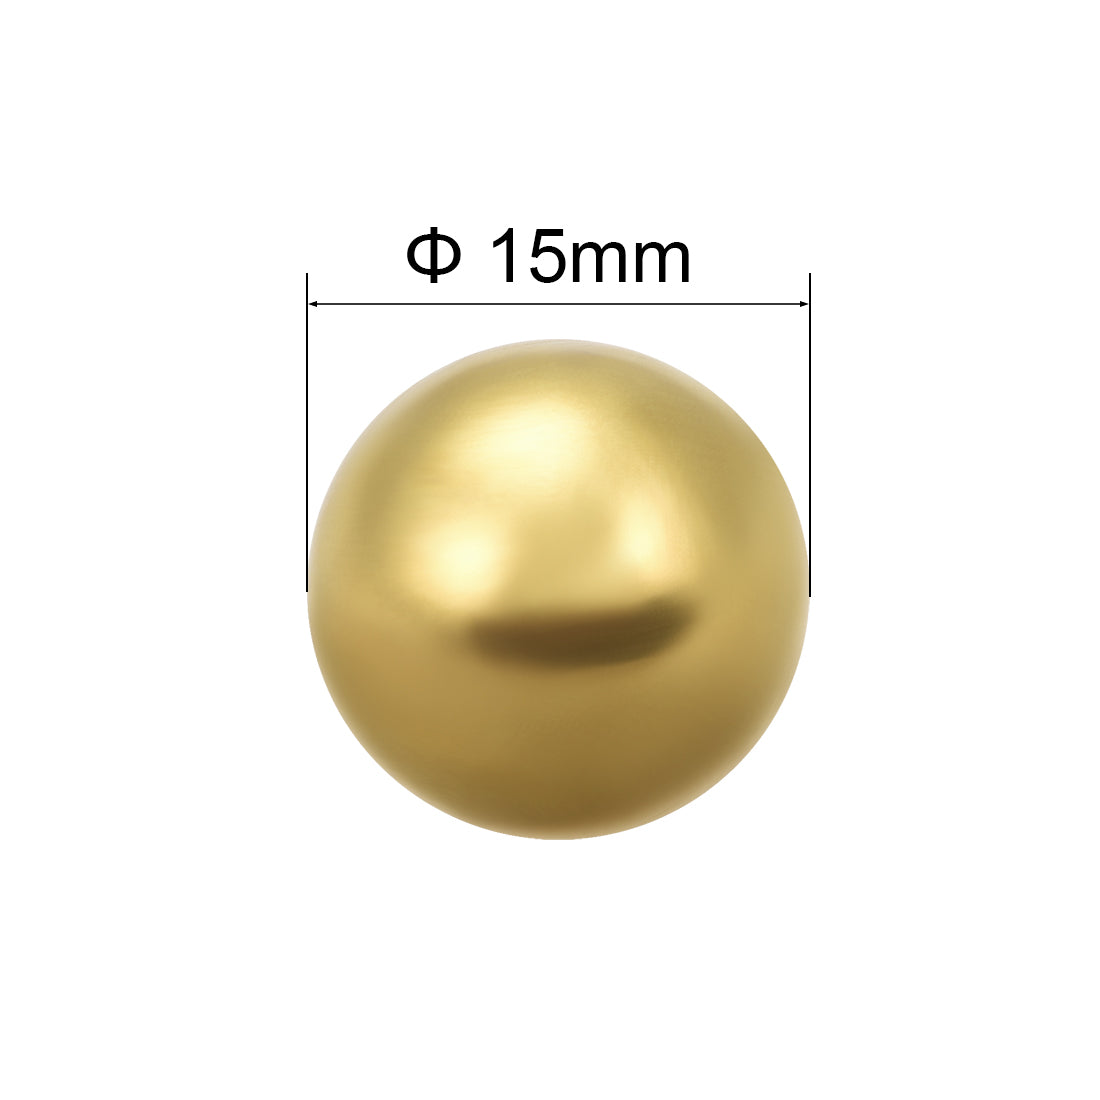 Uxcell Uxcell 15mm Precision Solid Brass Bearing Balls 5pcs